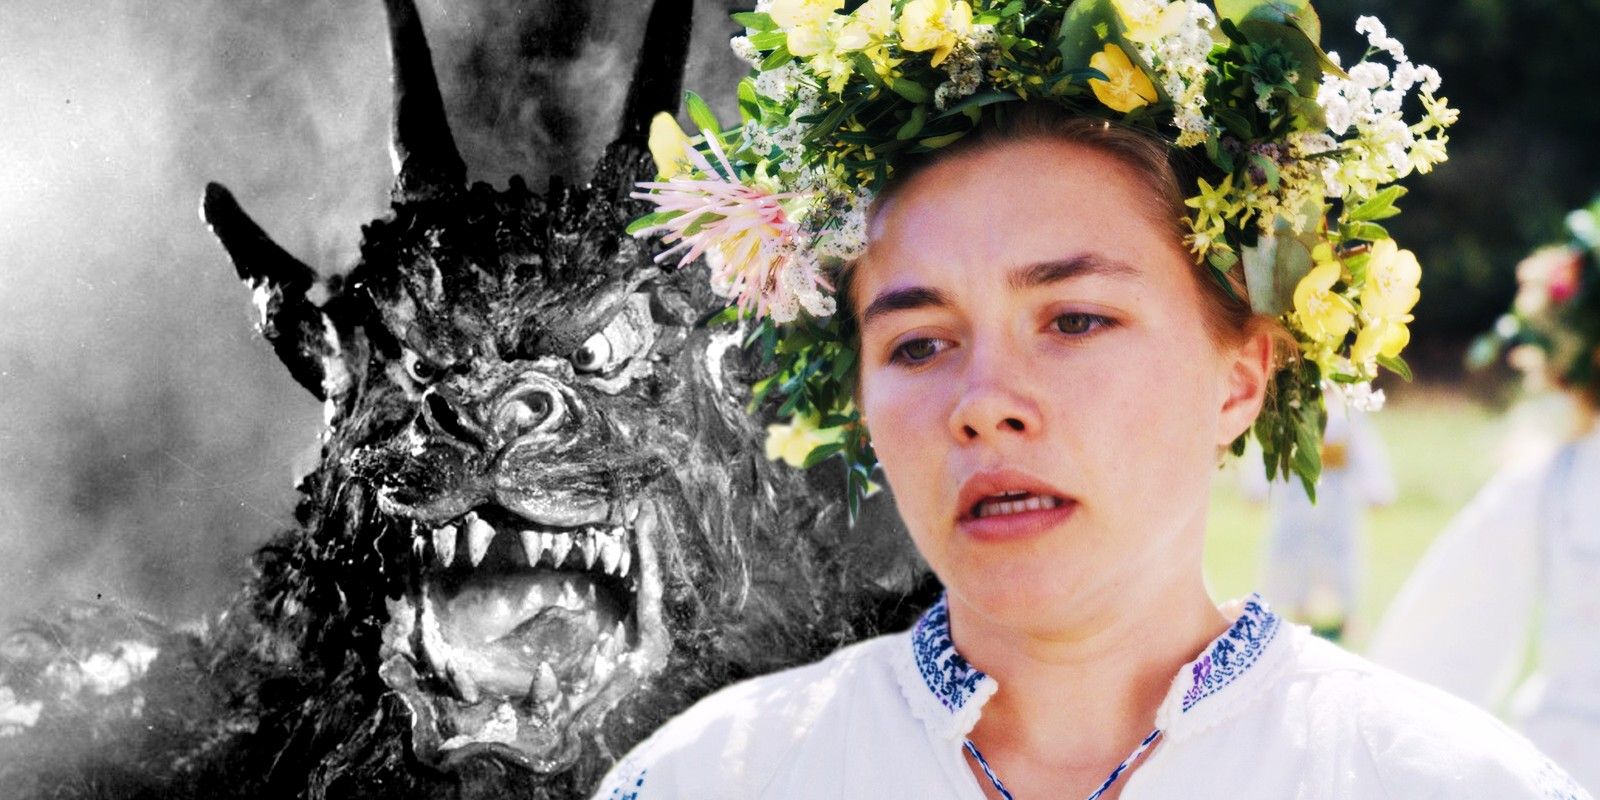 Dani in Midsommar and a creature from Curse of the Demon